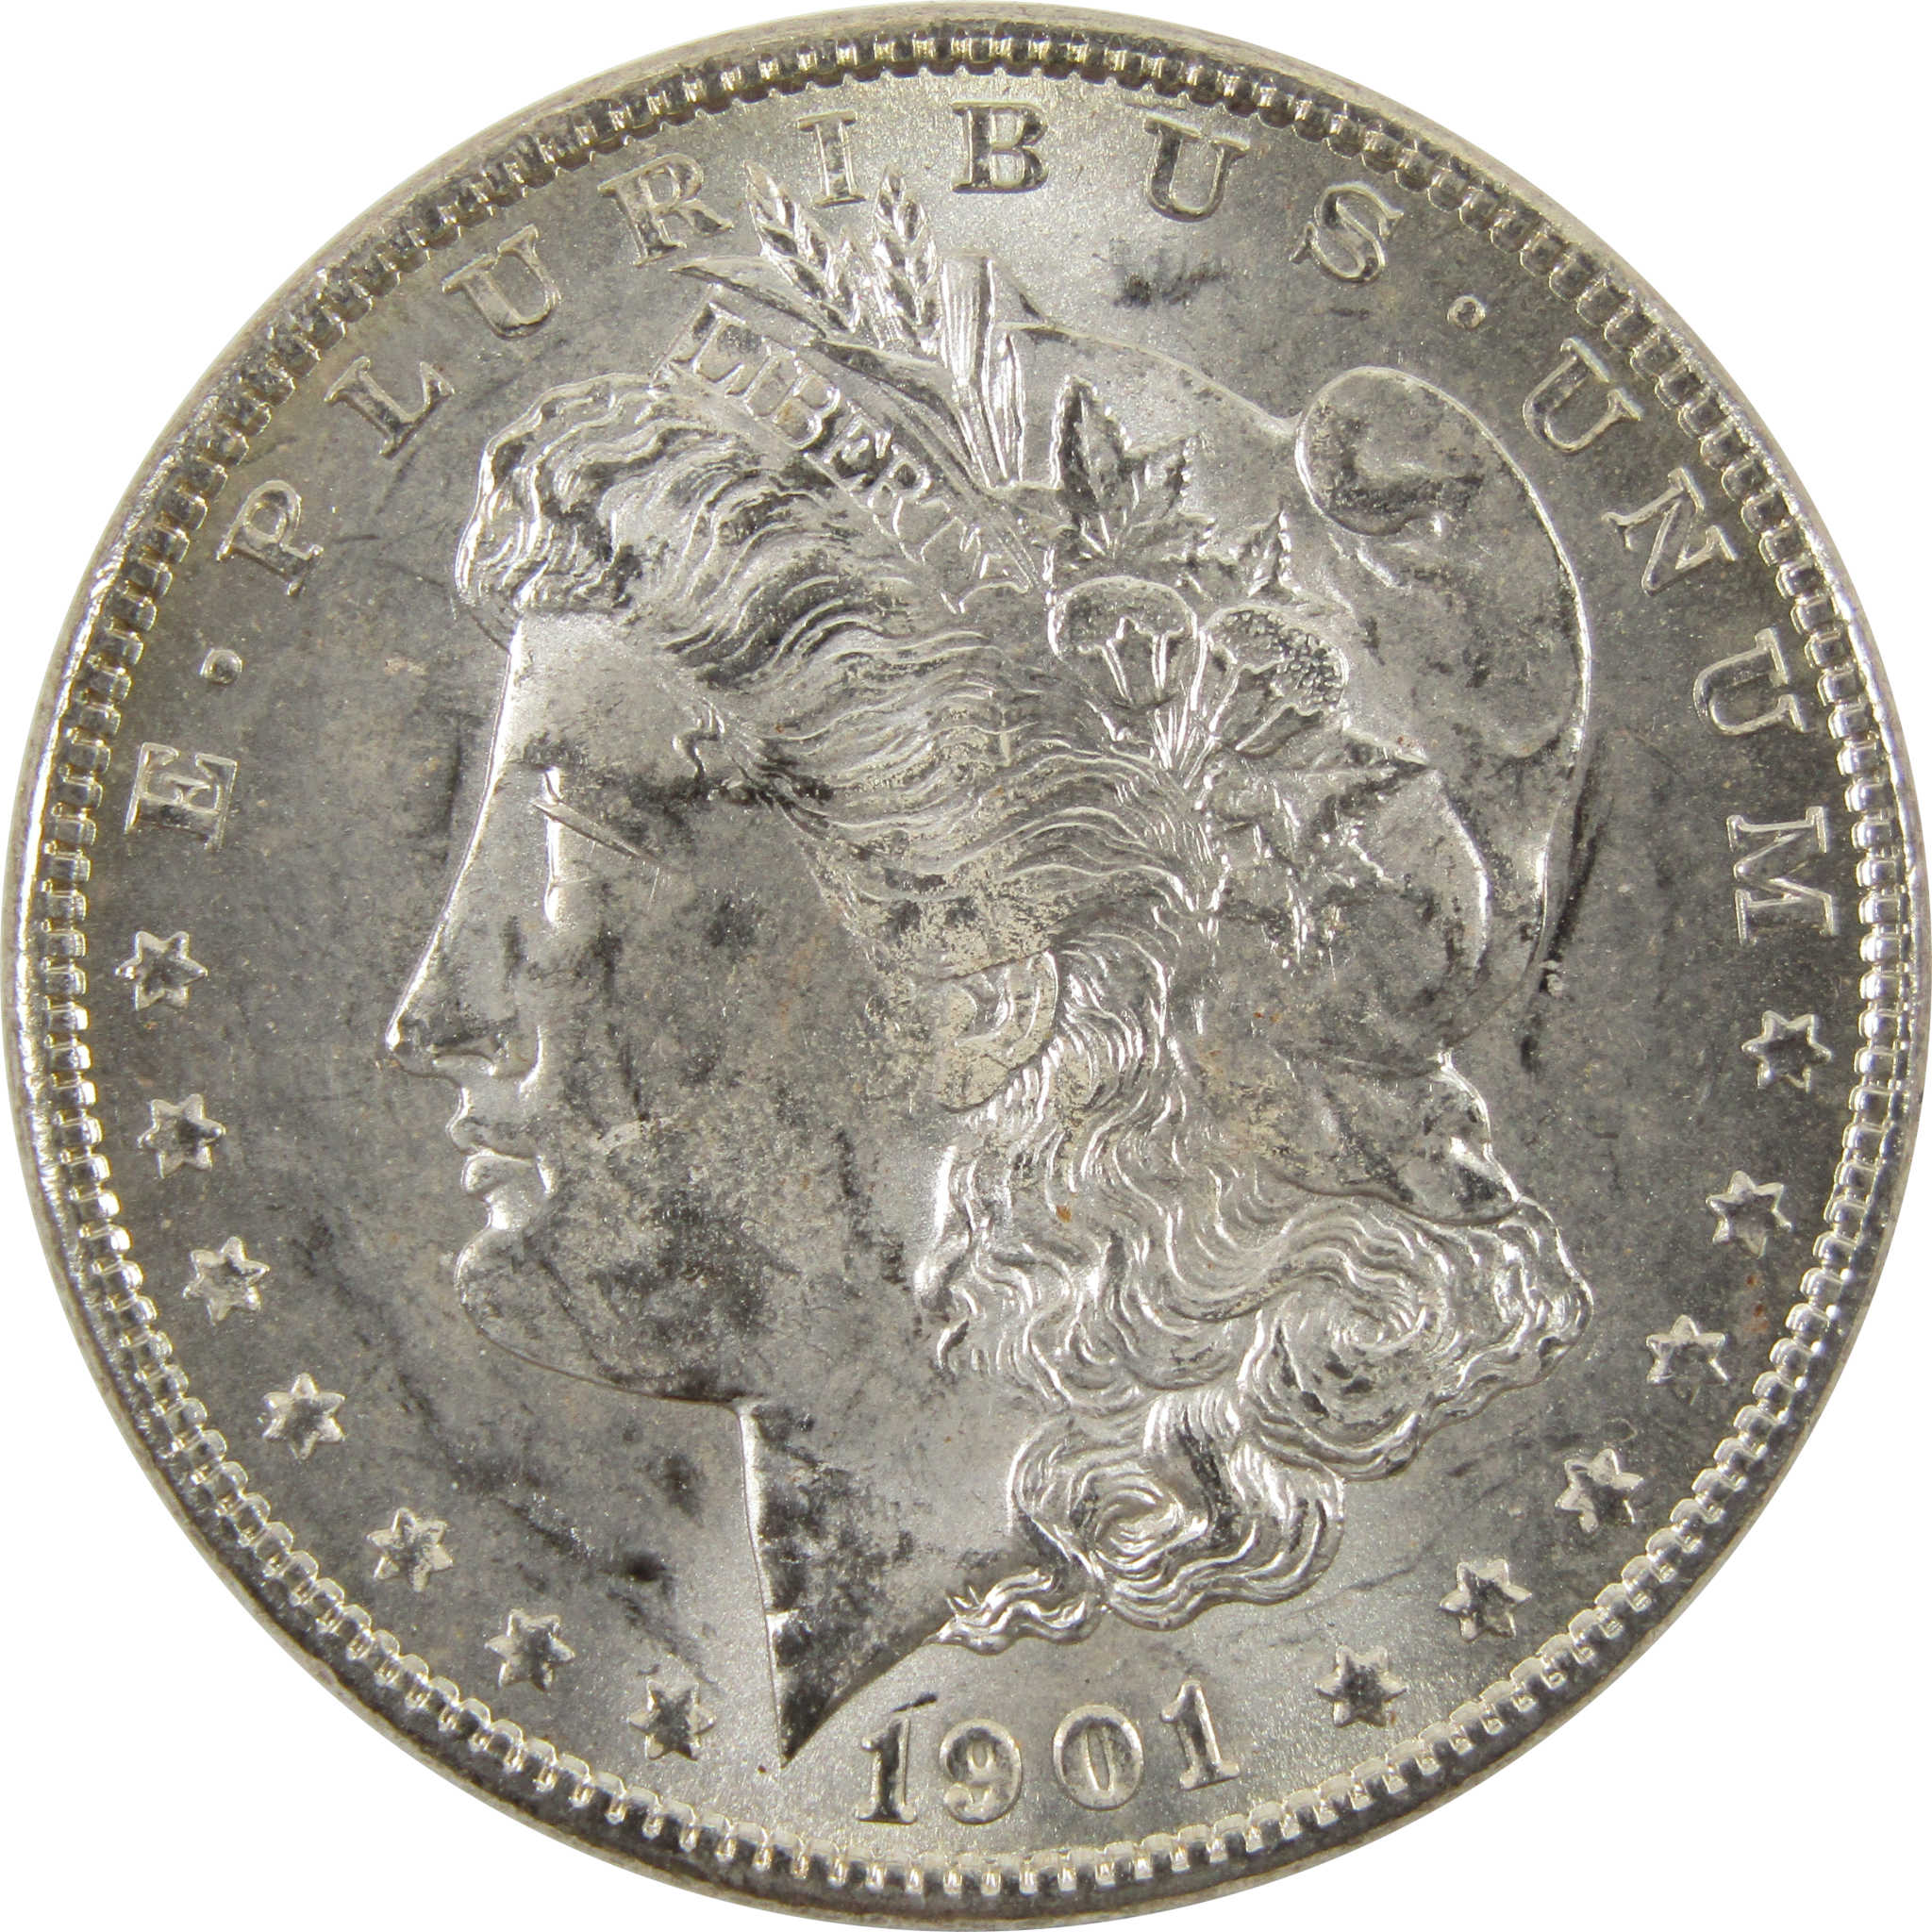 1901 O Morgan Dollar Uncirculated Details 90% Silver $1 SKU:I10468 - Morgan coin - Morgan silver dollar - Morgan silver dollar for sale - Profile Coins &amp; Collectibles